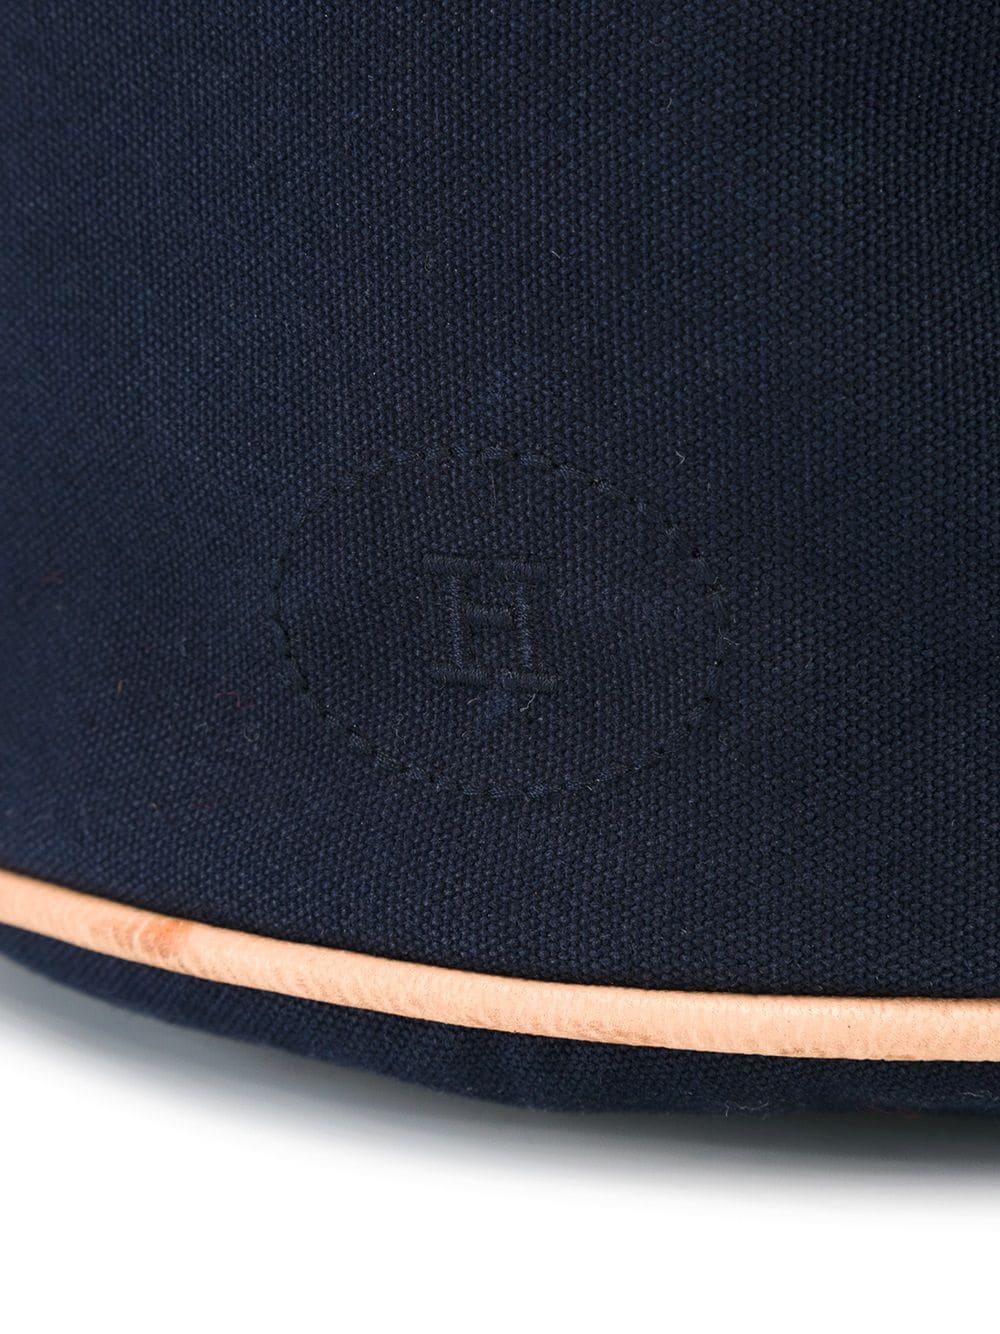 Navy Hermes Matelot cotton Tote Bag In Good Condition For Sale In Paris, FR